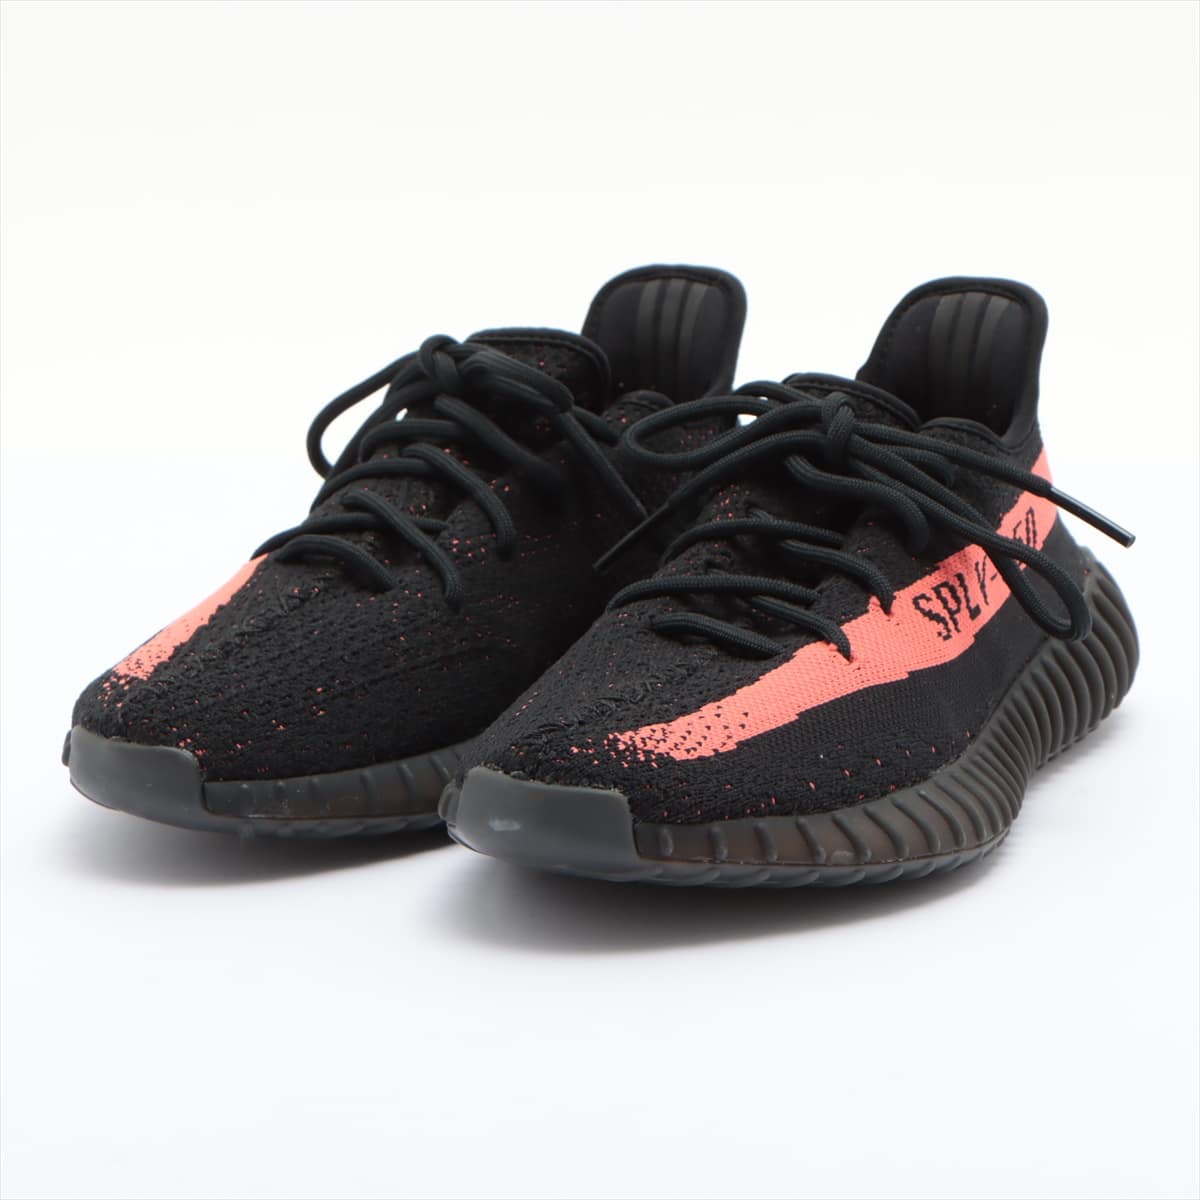 Adidas x Kanye West YEEZY BOOST 350 V2 Knit Sneakers 26cm Men's Black BY9612